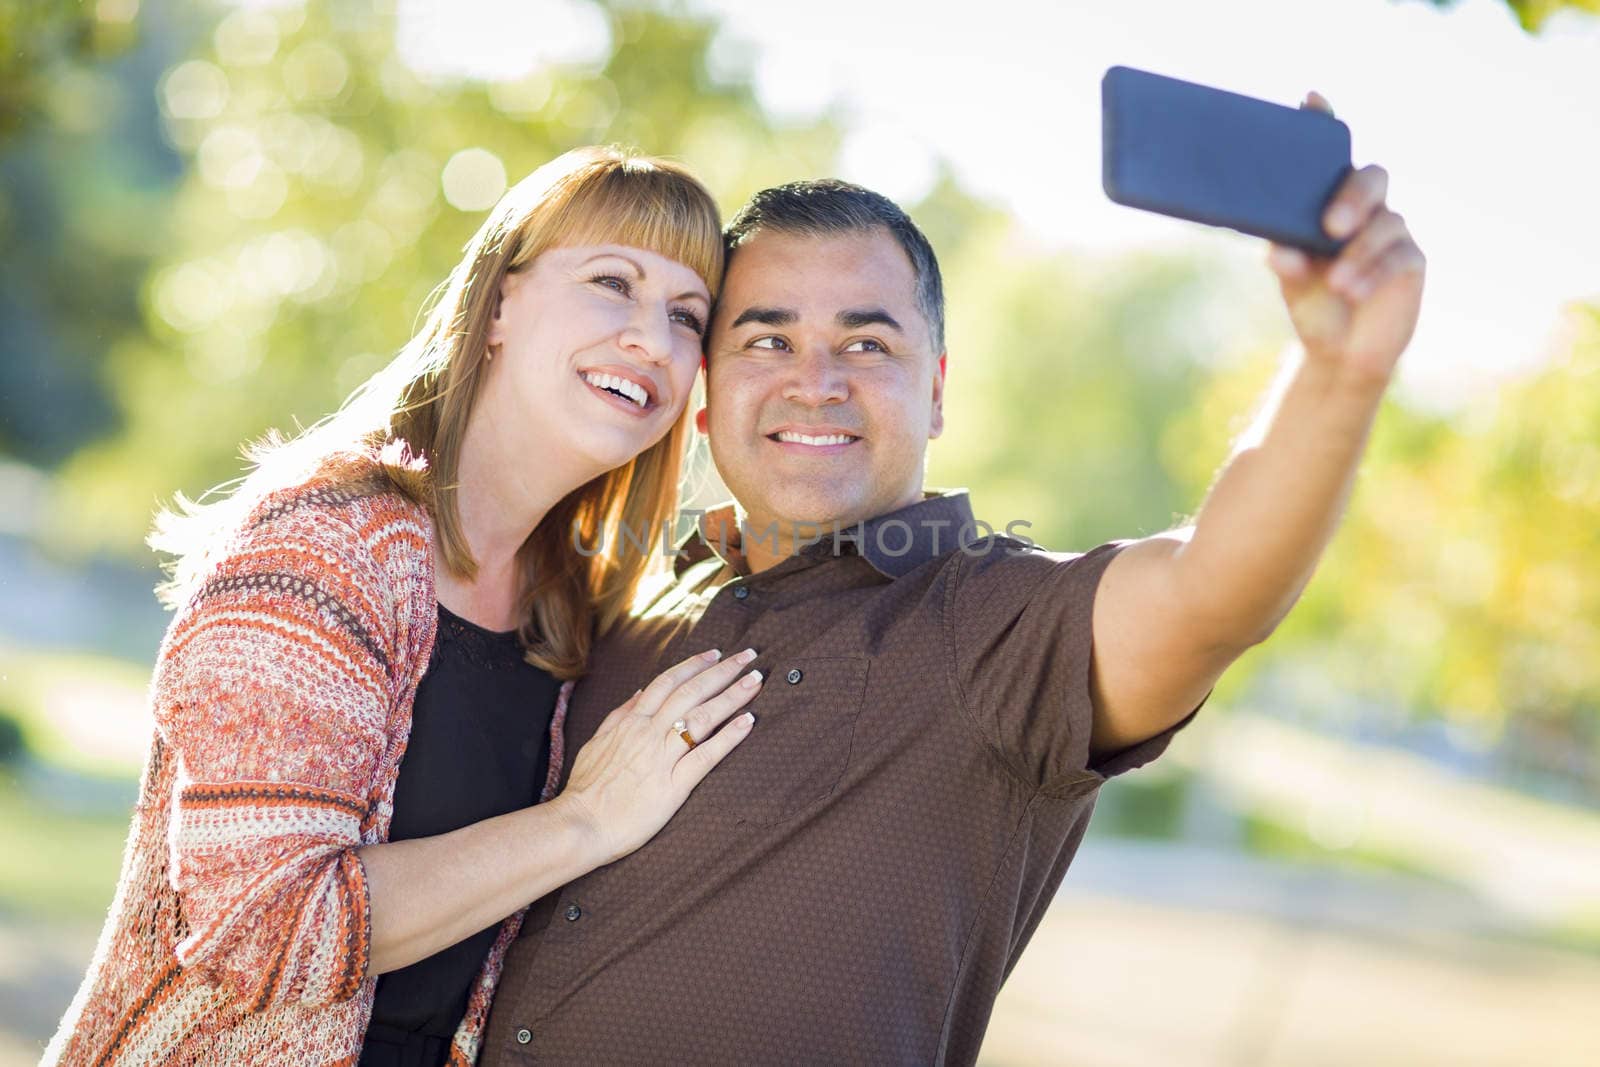 Attractive Mixed Race Couple Taking Self Portraits in the Park.